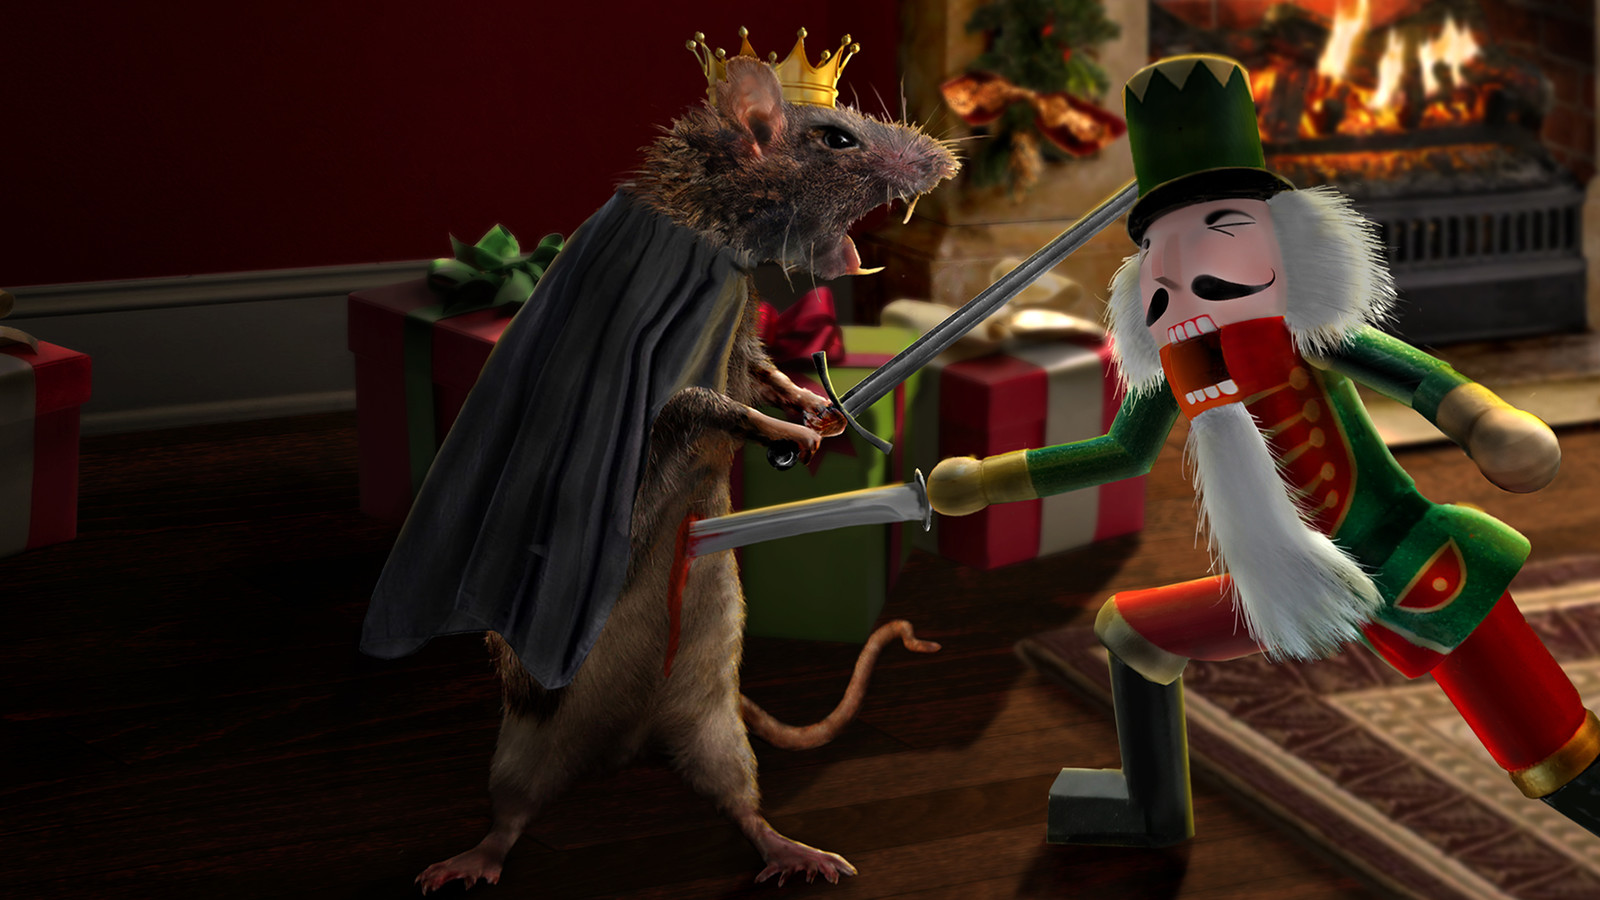 Nutcracker and the Rat King. 
Photoshop.